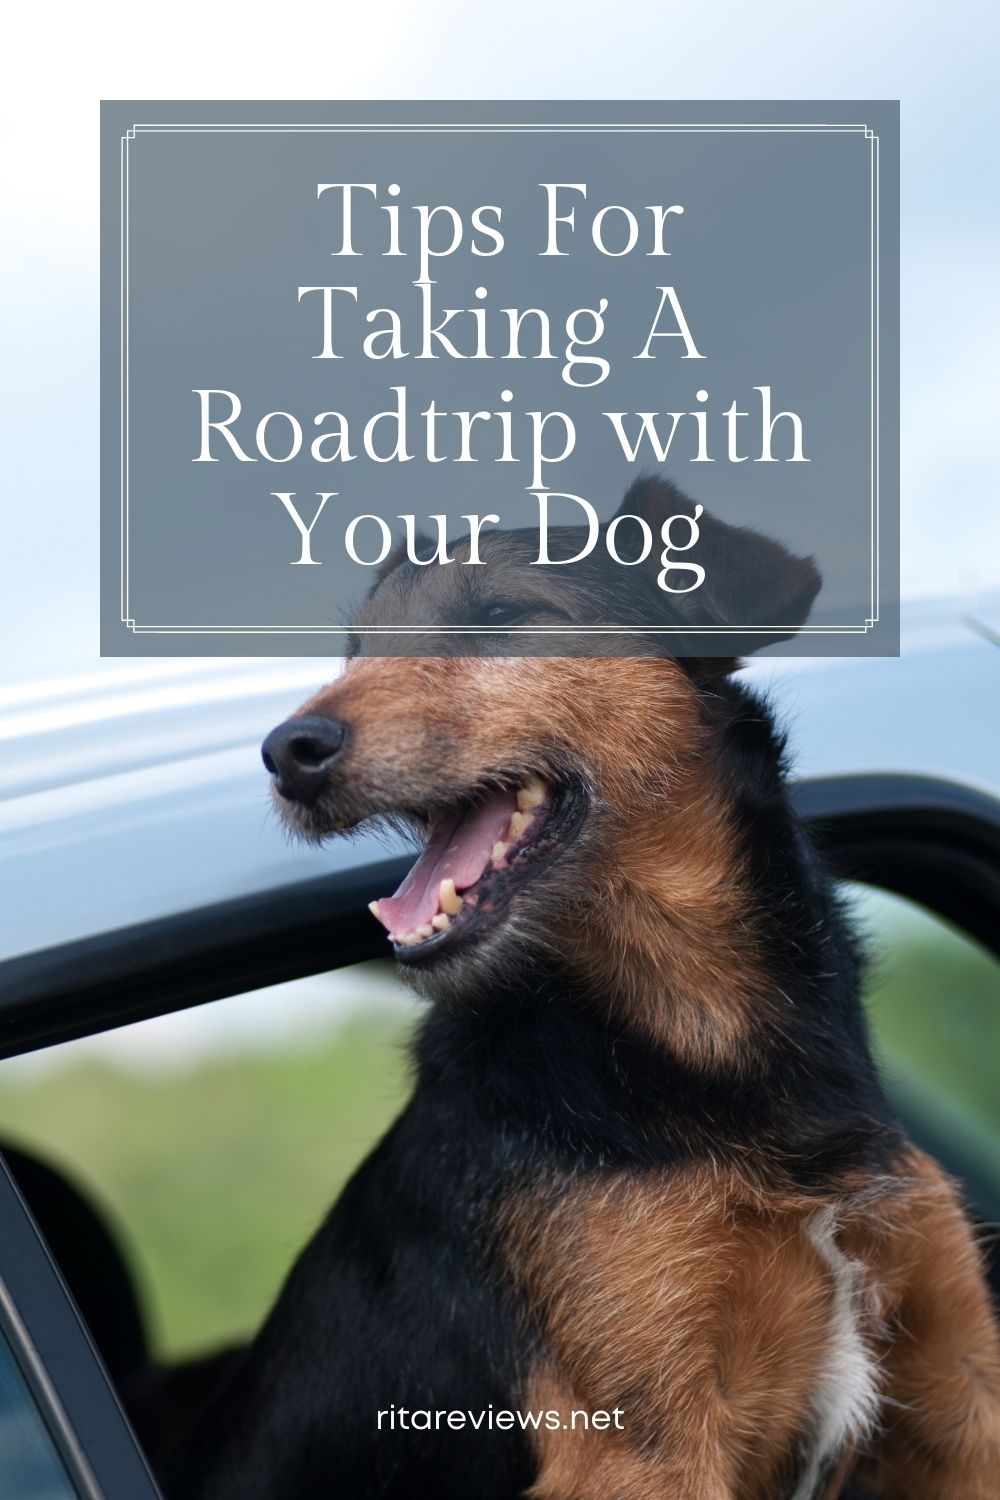 Tips For Taking A Roadtrip with Your Dog